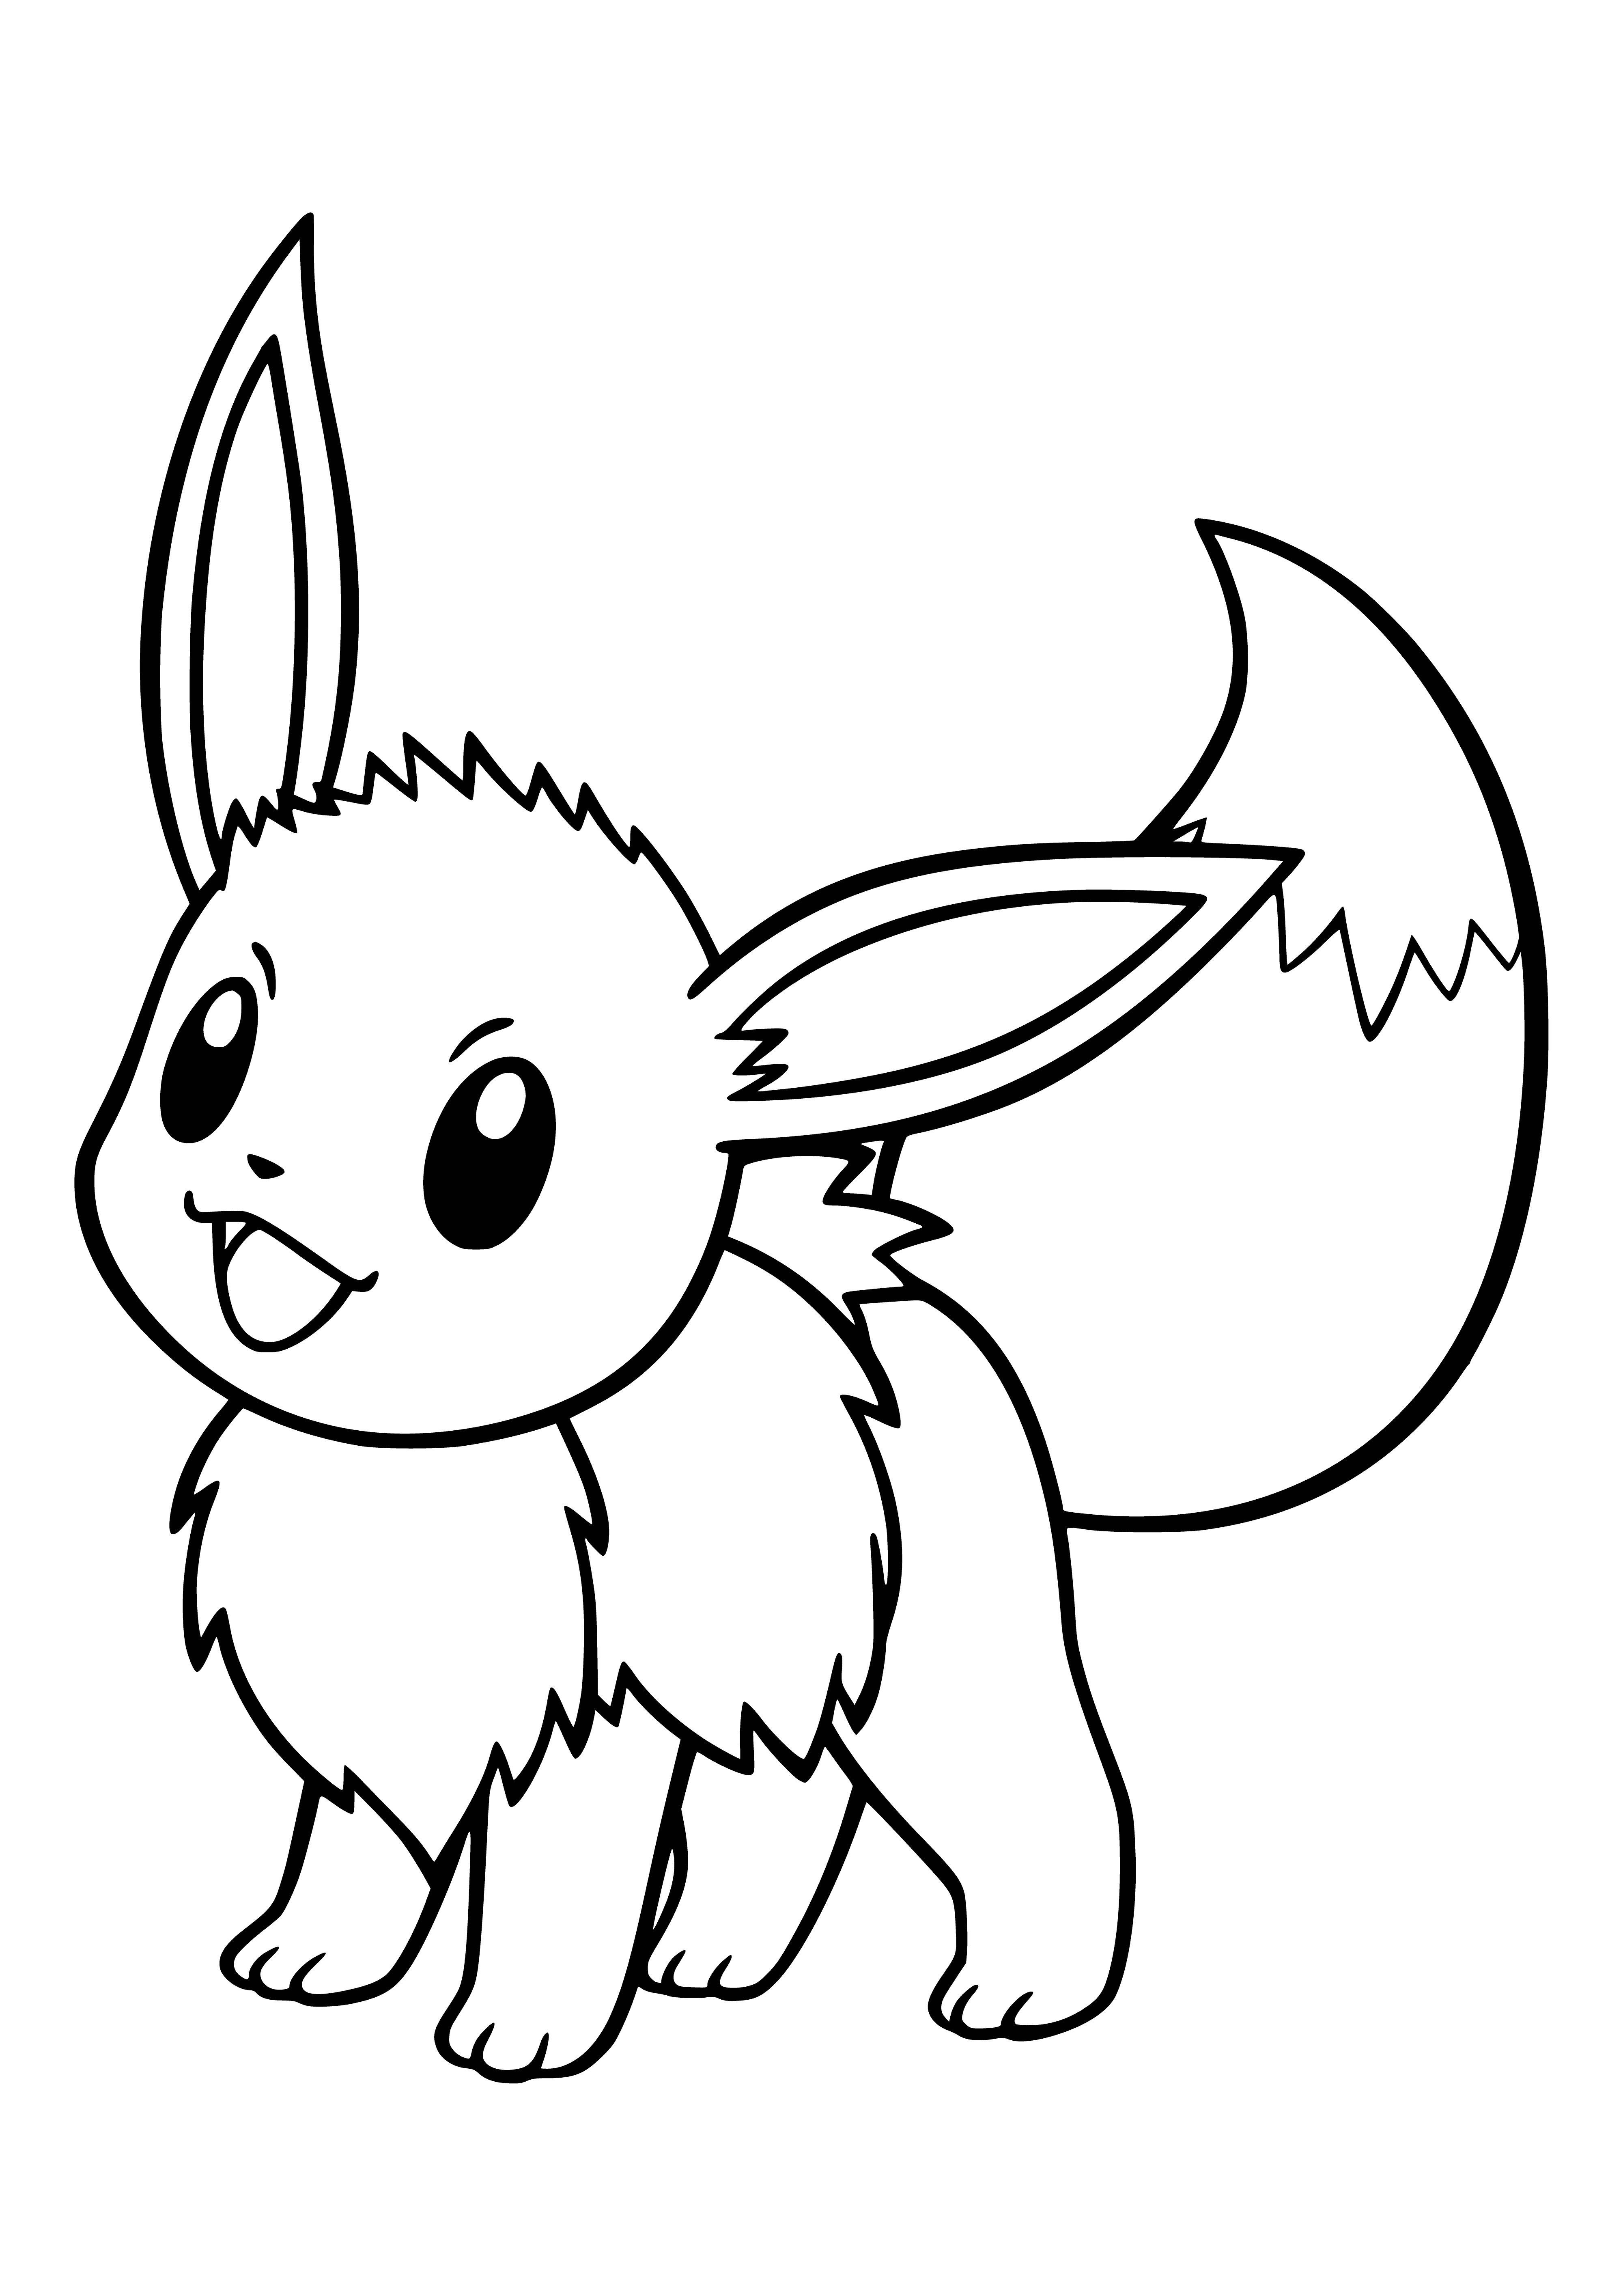 coloring page: Cute and furry Pokémon, Eevee has big round eyes, small black nose, 3-toed paws, and cream-colored ruff.